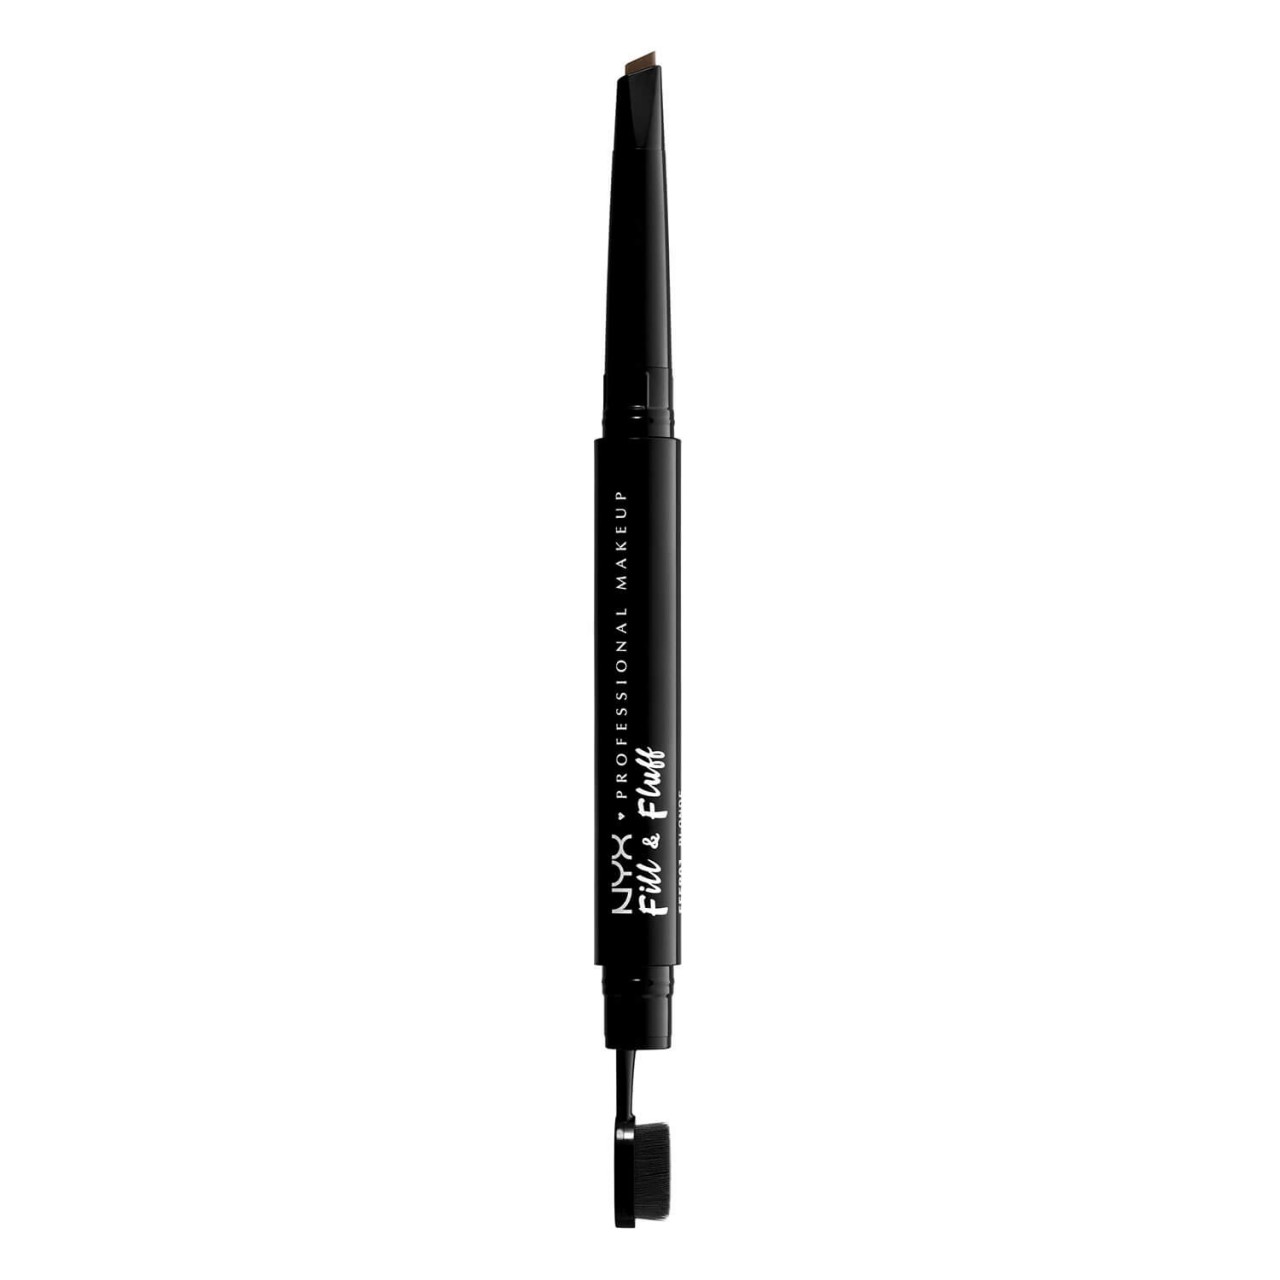 Fill & Fluff - Eyebrow Pomade Pencil Ash Brown von NYX Professional Makeup